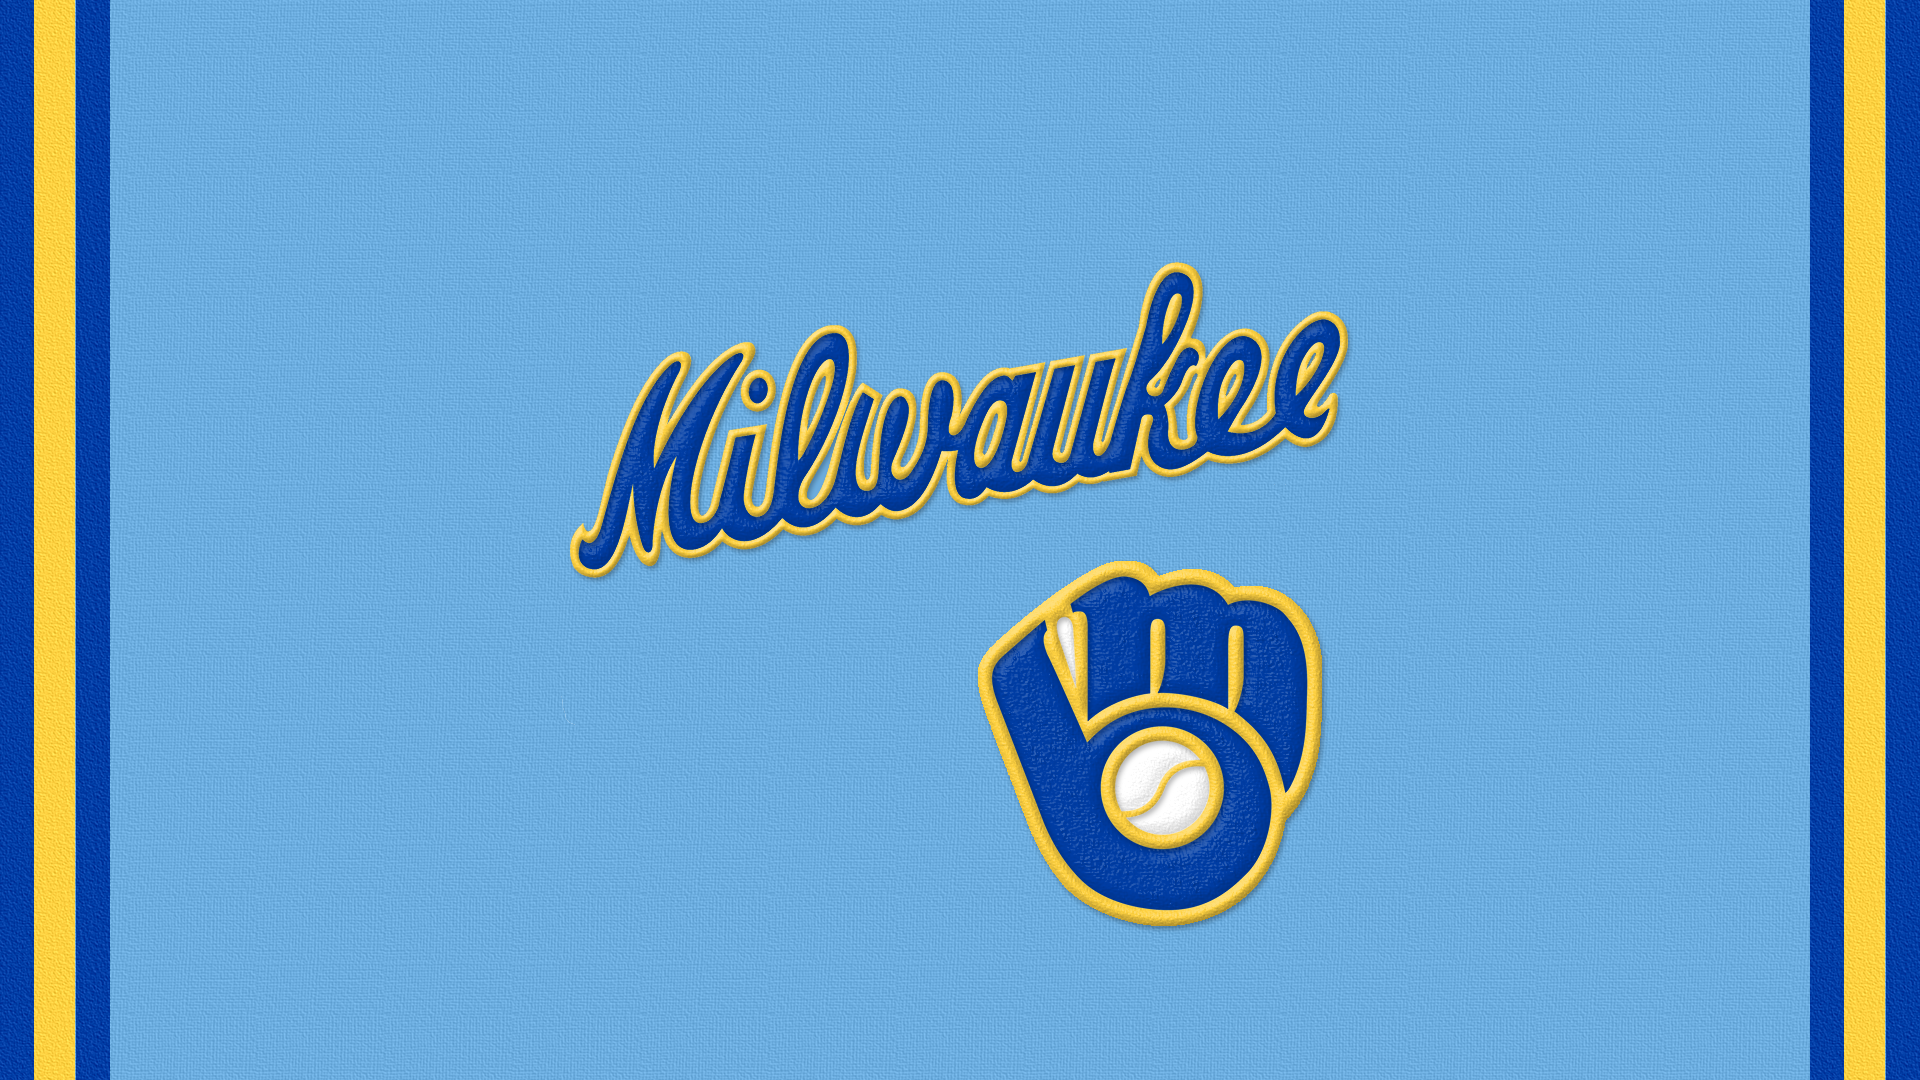 Retro Brewers desktop wallpaper, 1920x1080 1366x768 and other